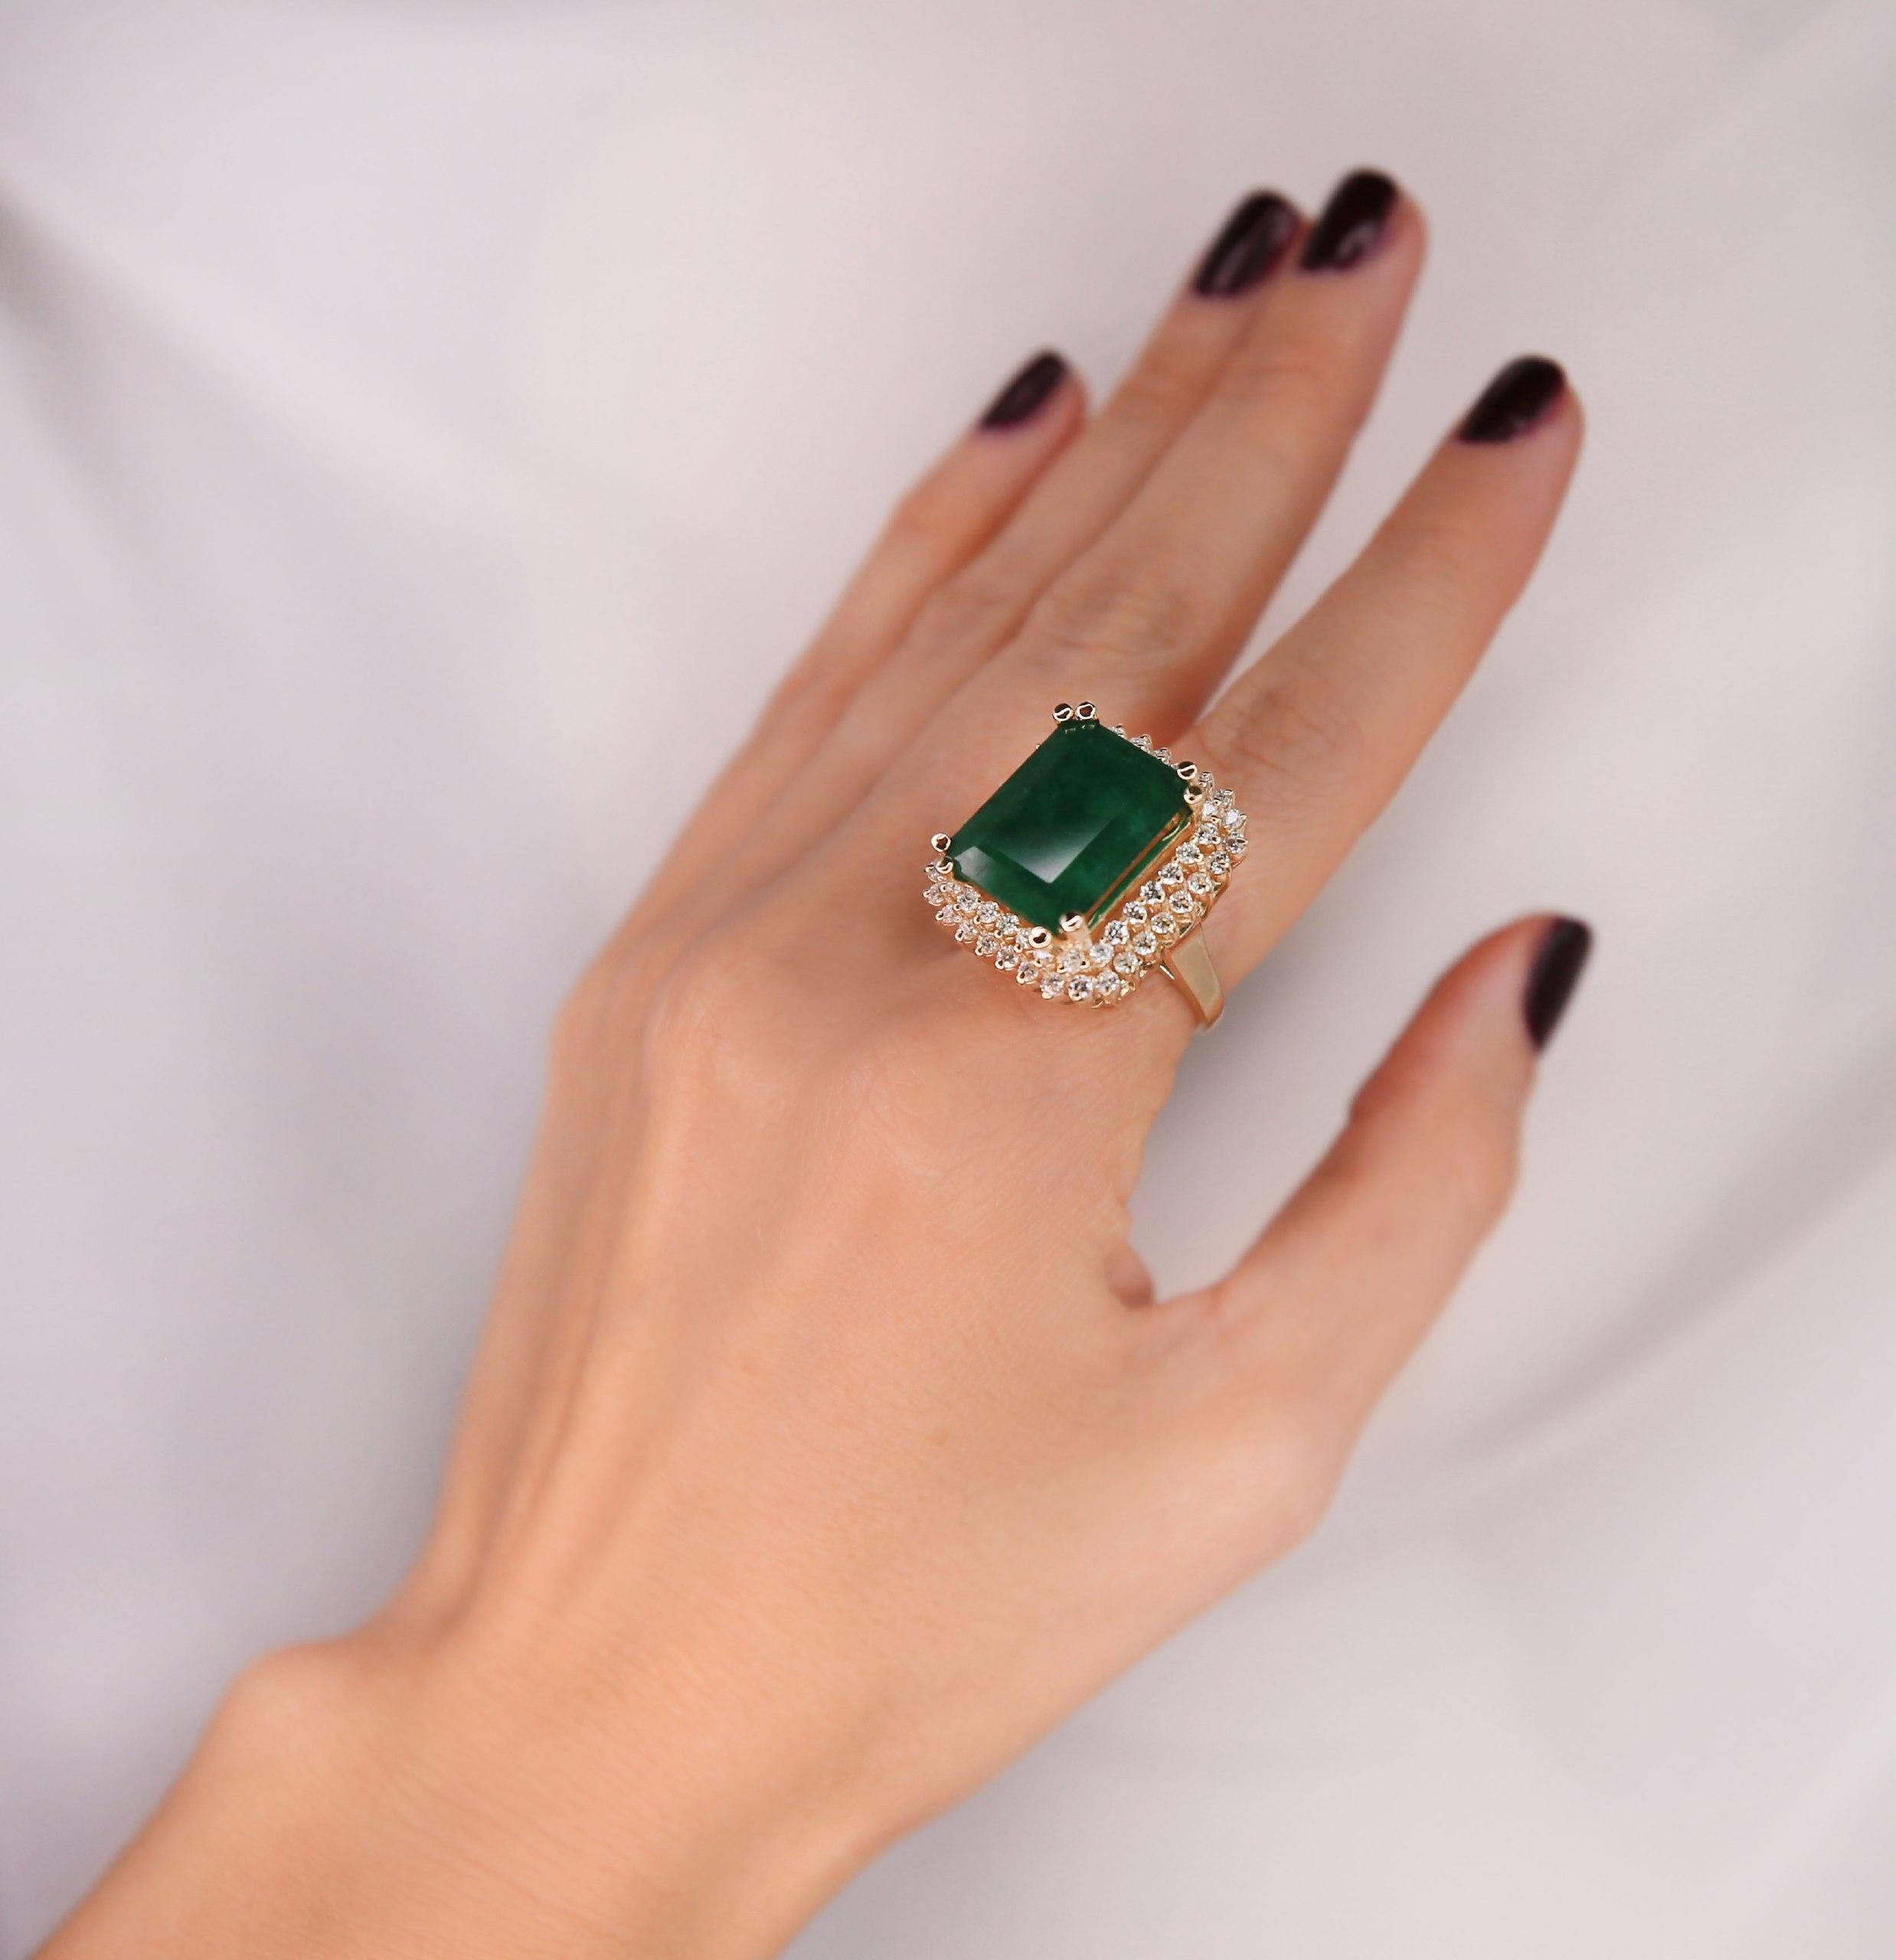 Ring Yellow Gold 18 K

Total Ring Weight: 9.2 Grams
Emerald Weight: 5.51 Carat (13.00x11.00 Millimeters)
Diamond Weight: 1.40 Carat (F-G Color, VS2-SI1 Clarity )

With a heritage of ancient fine Swiss jewelry traditions, NATKINA is a Geneva based